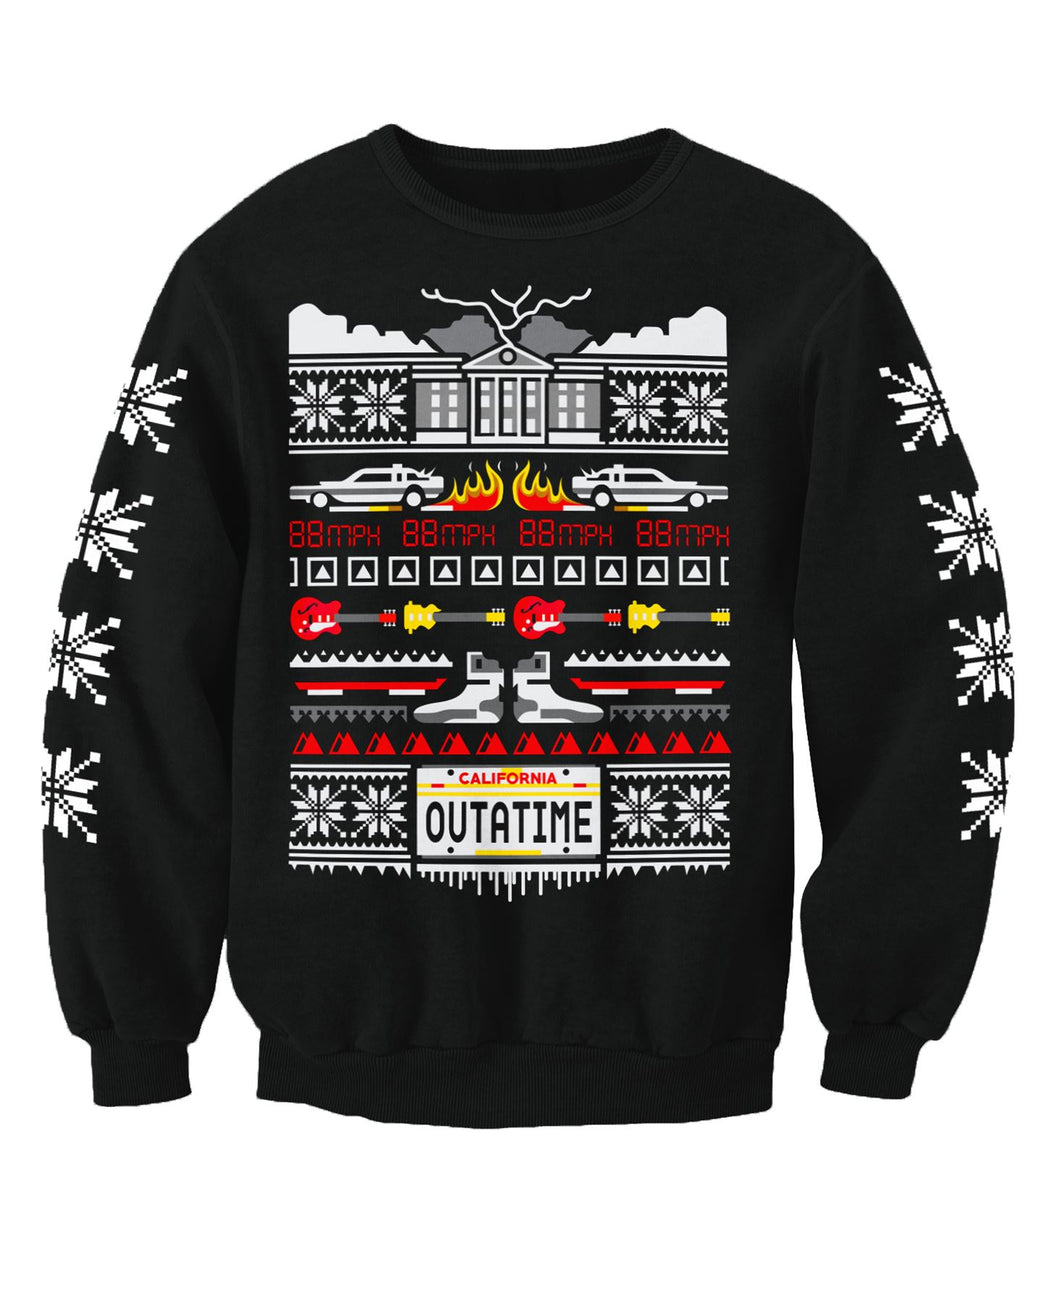 Back To The Future Christmas Jumper